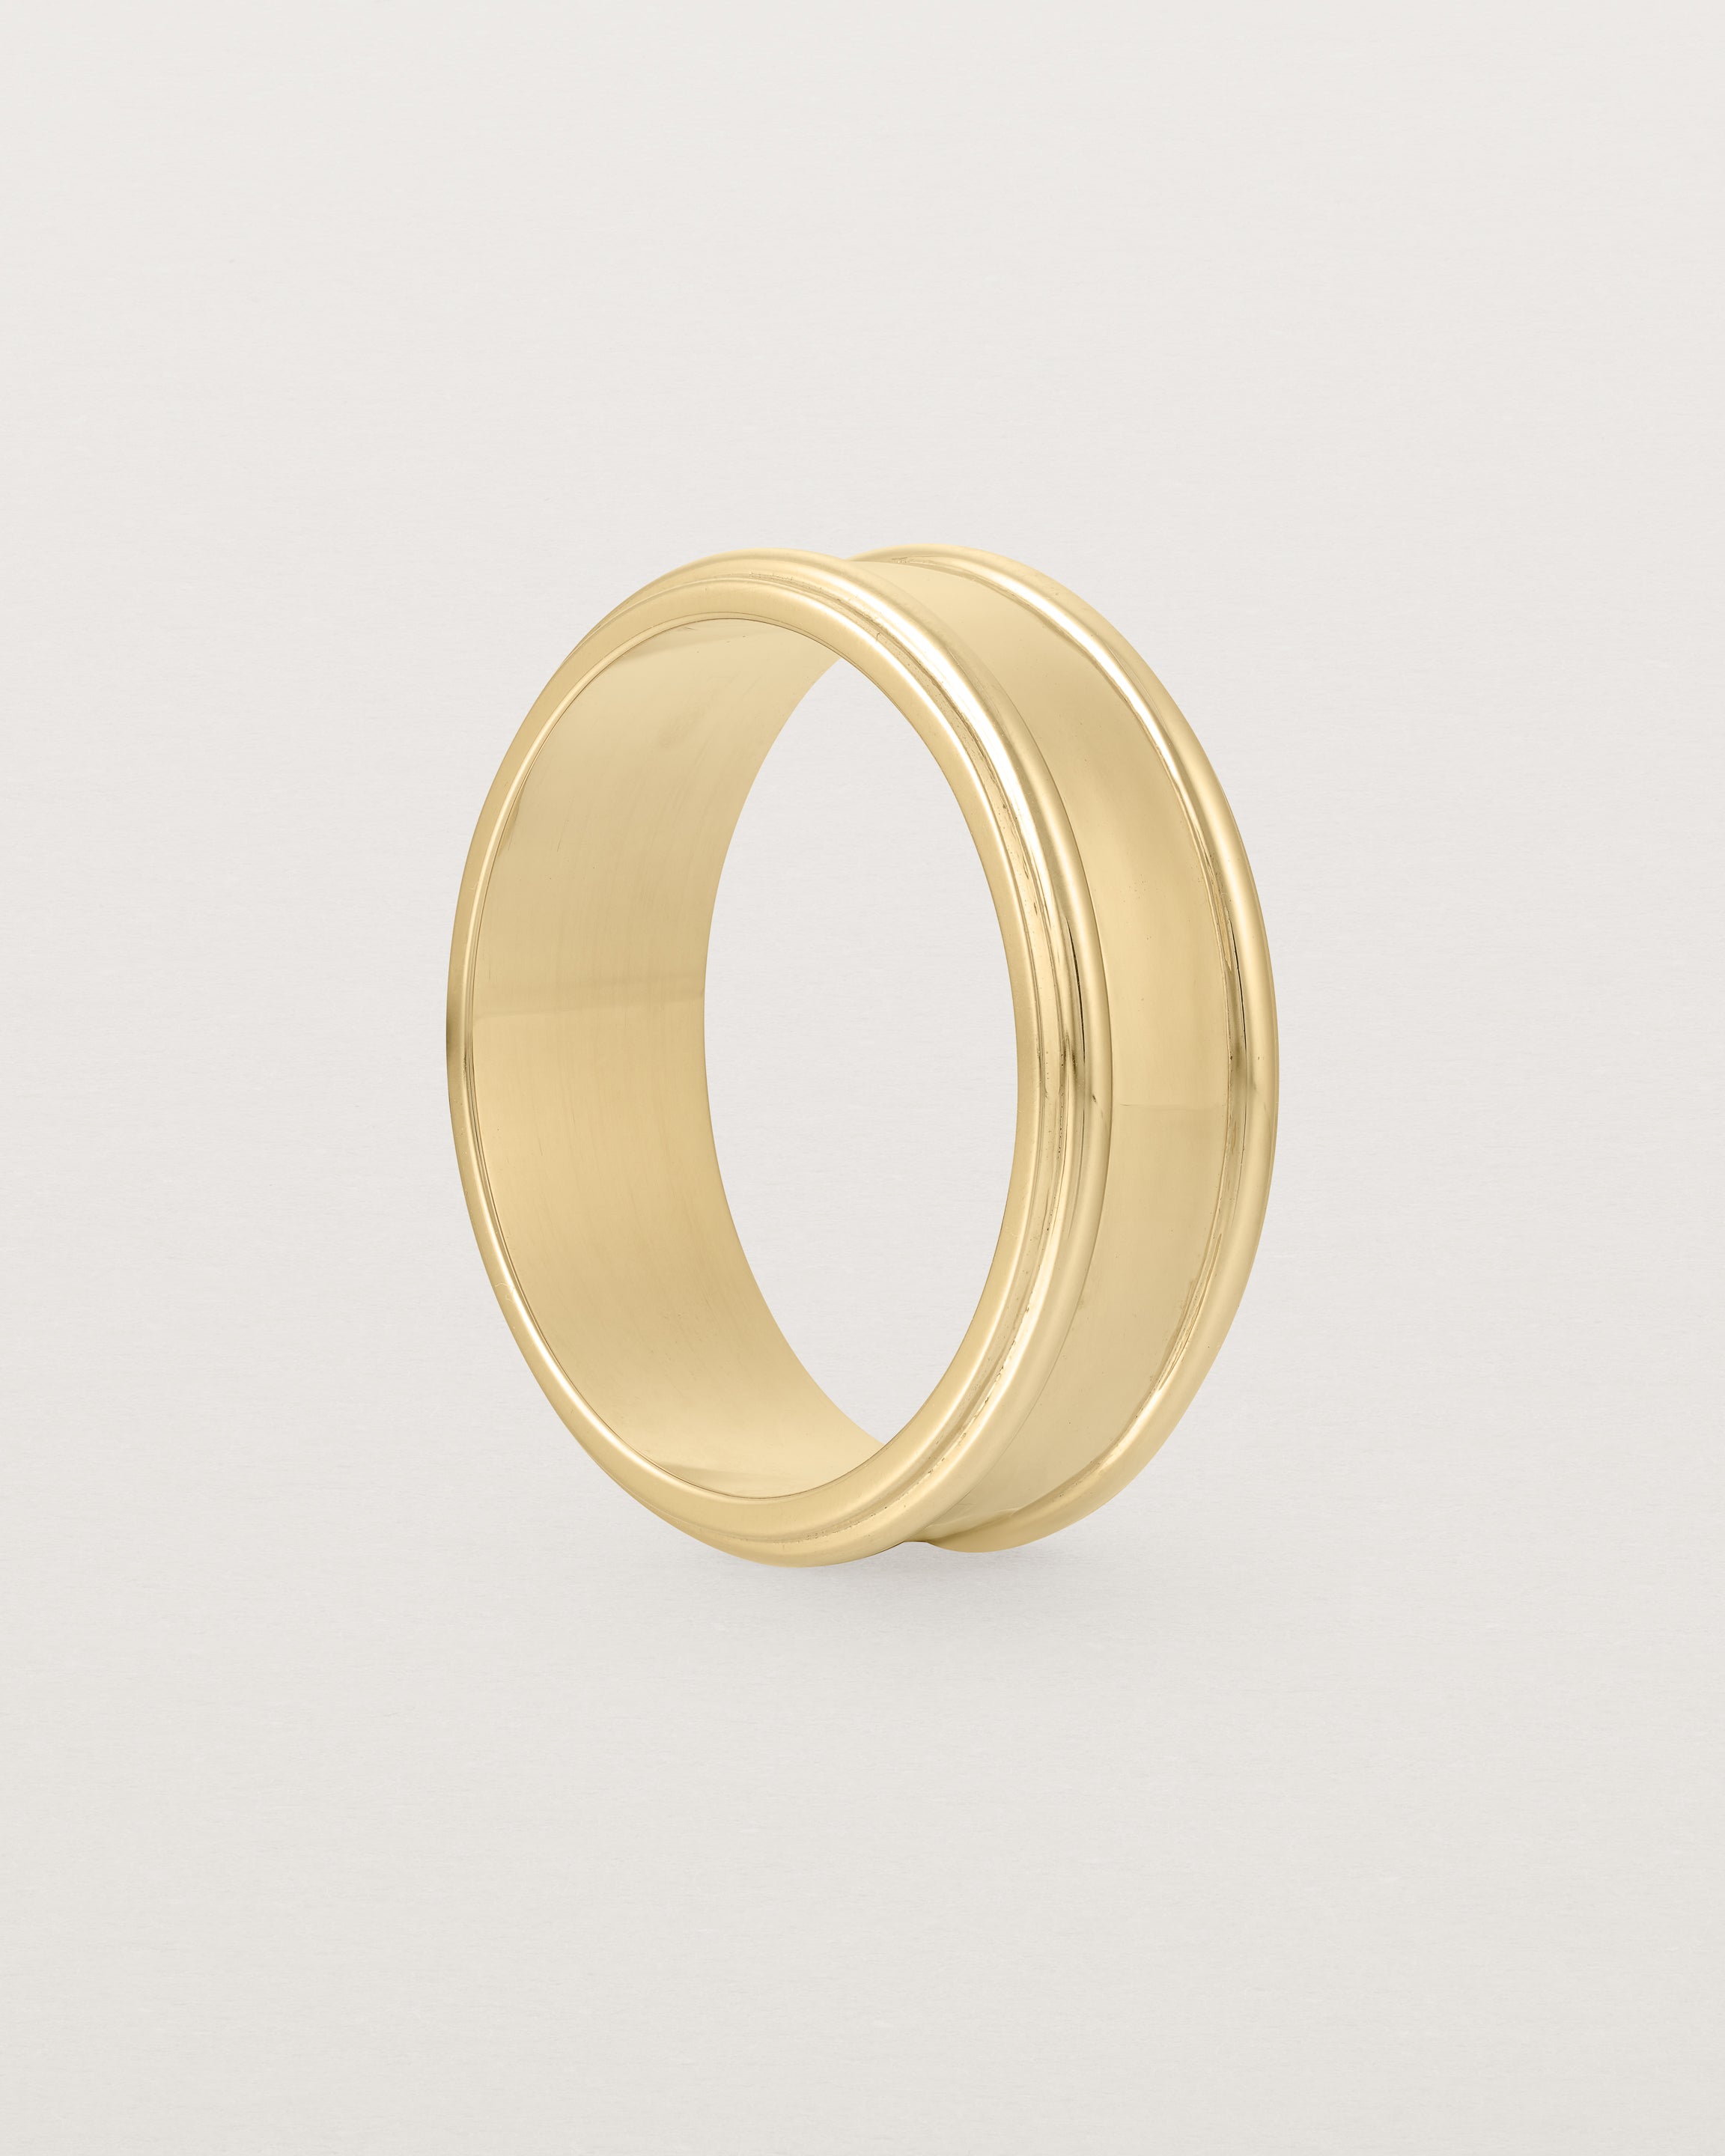 Standing view of the Border Wedding Ring | 7mm | Yellow Gold.